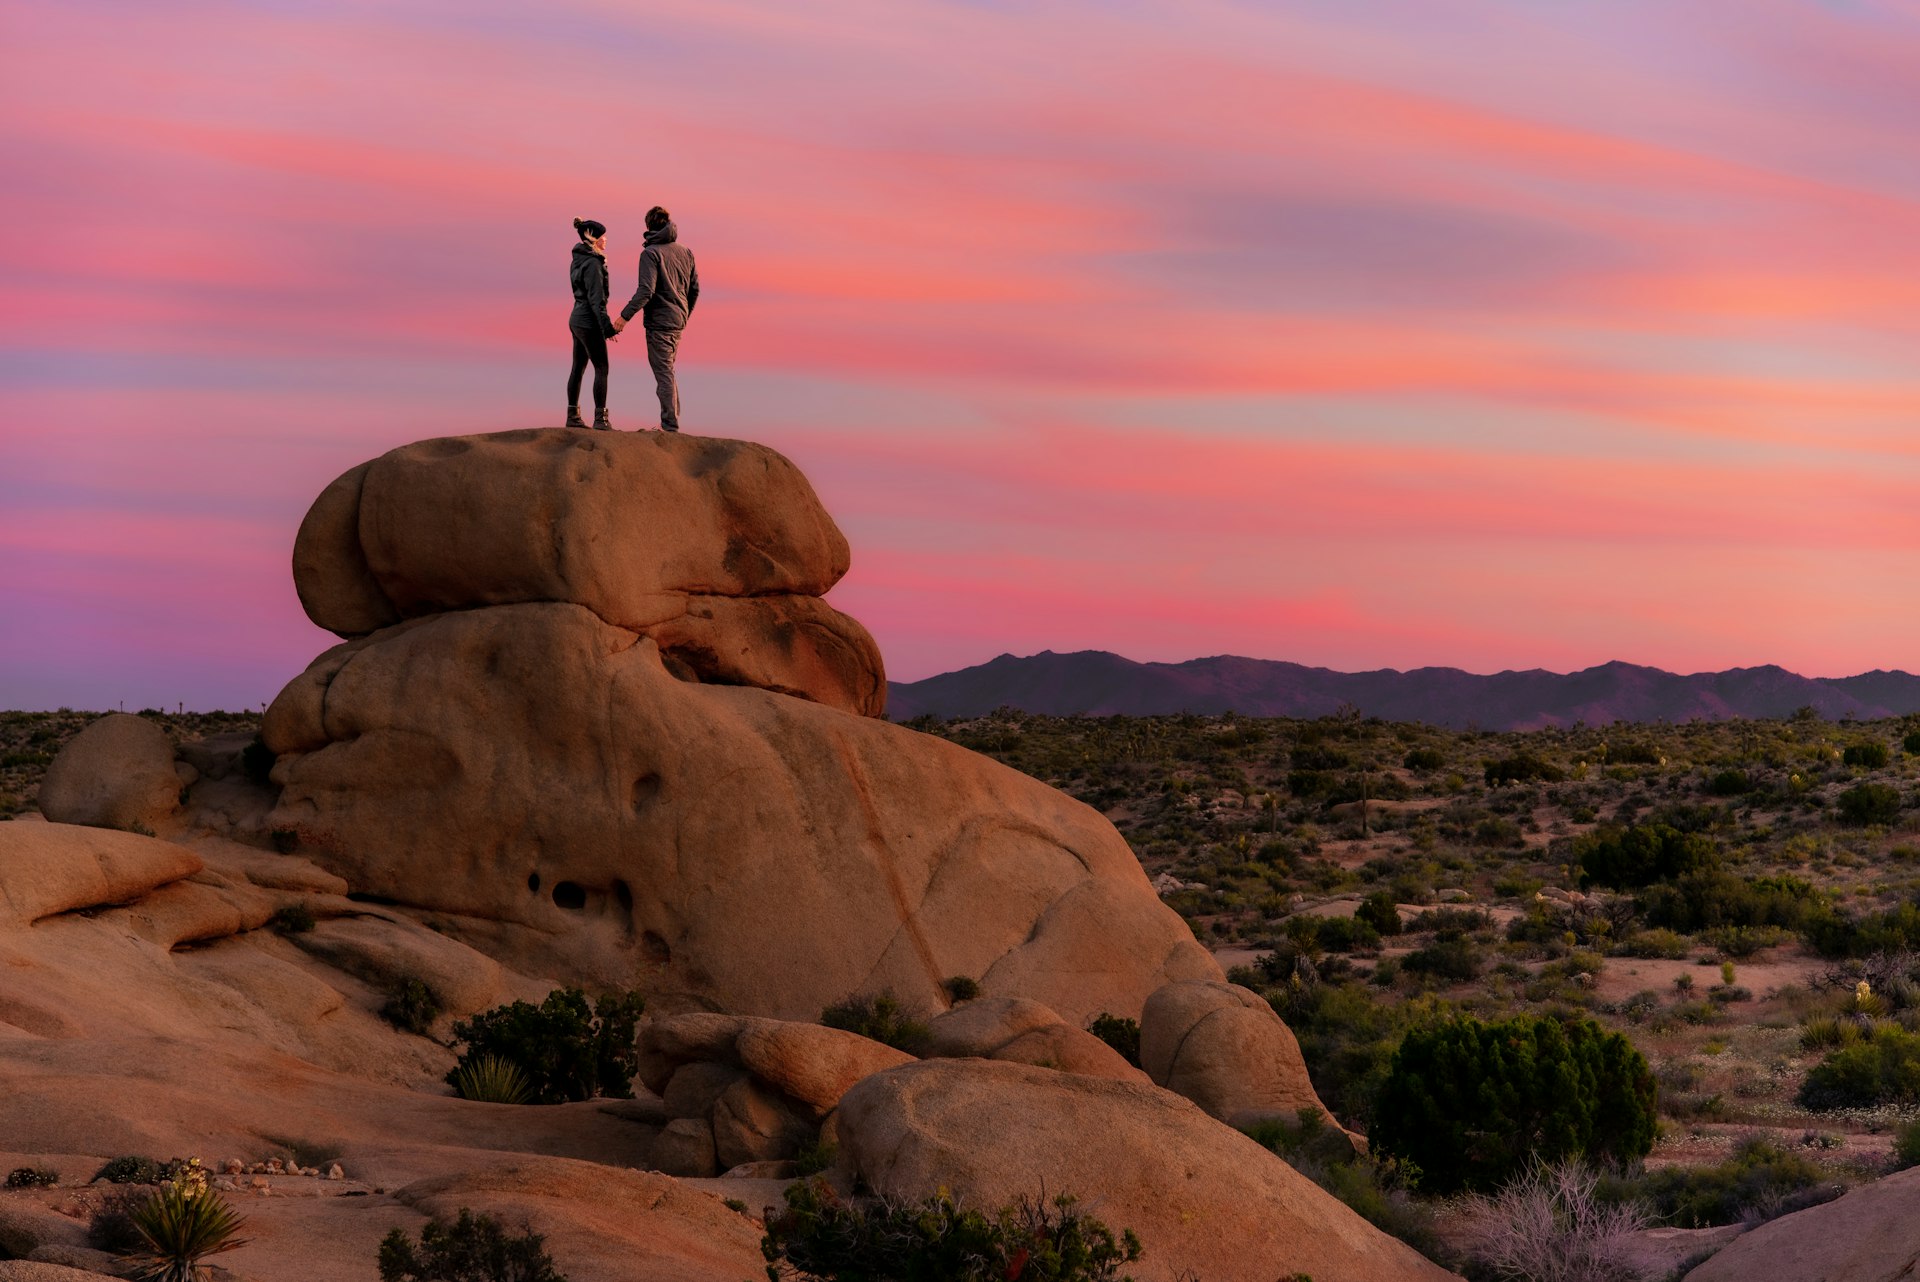 Couple standing on a rock at sunset in Joshua Tree National Park, California, USA